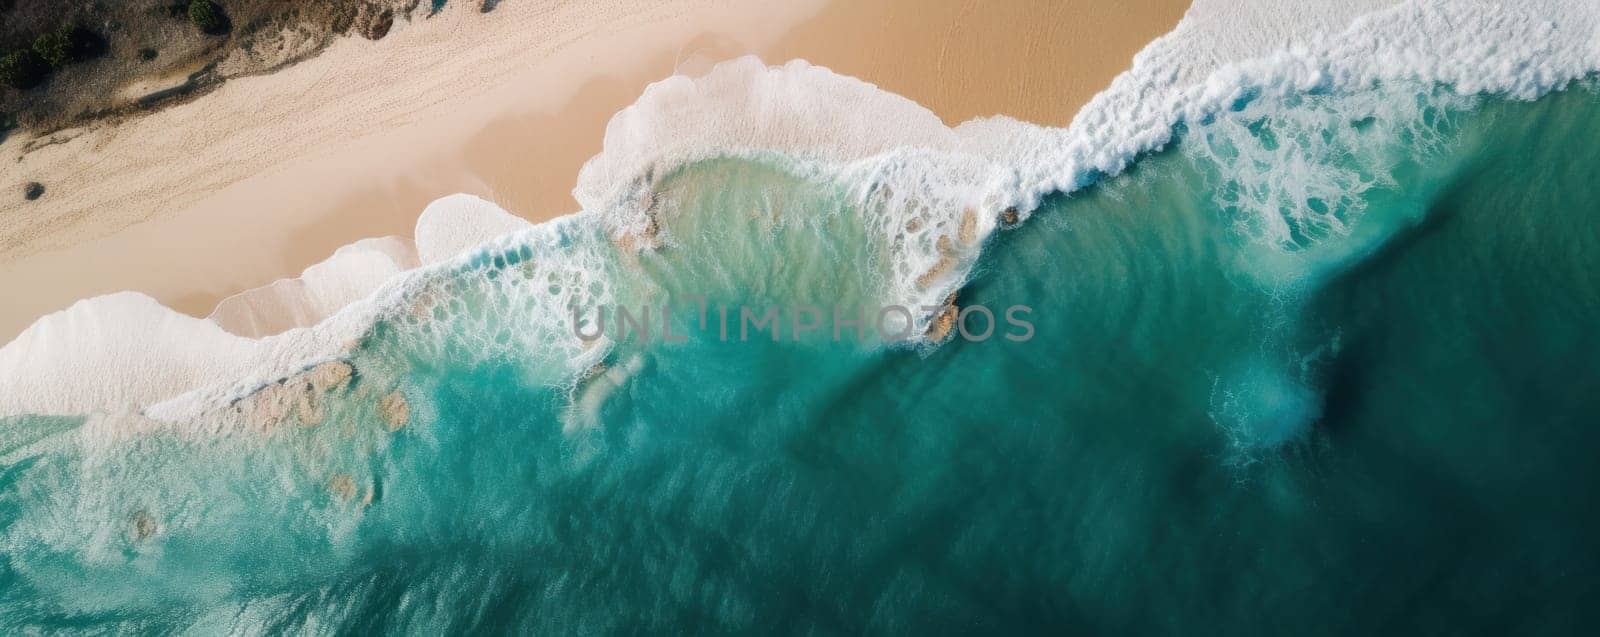 drone's eye view of a beach and ocean captures the peaceful by Sorapop